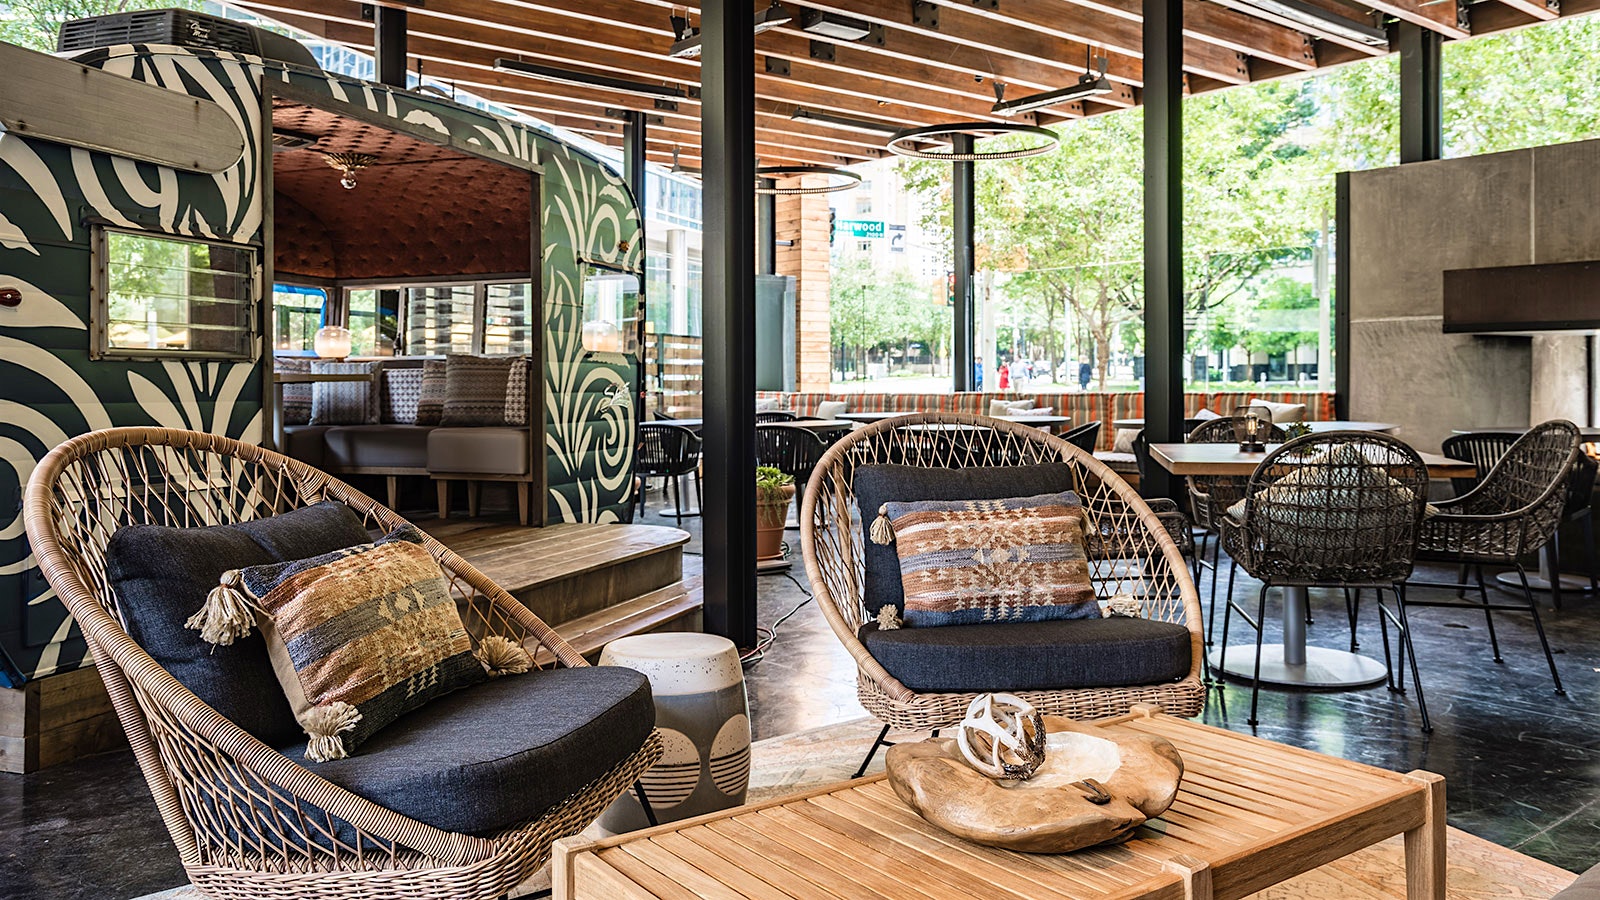  Outdoor patio area with a retractable roof at Haywire in Dallas 